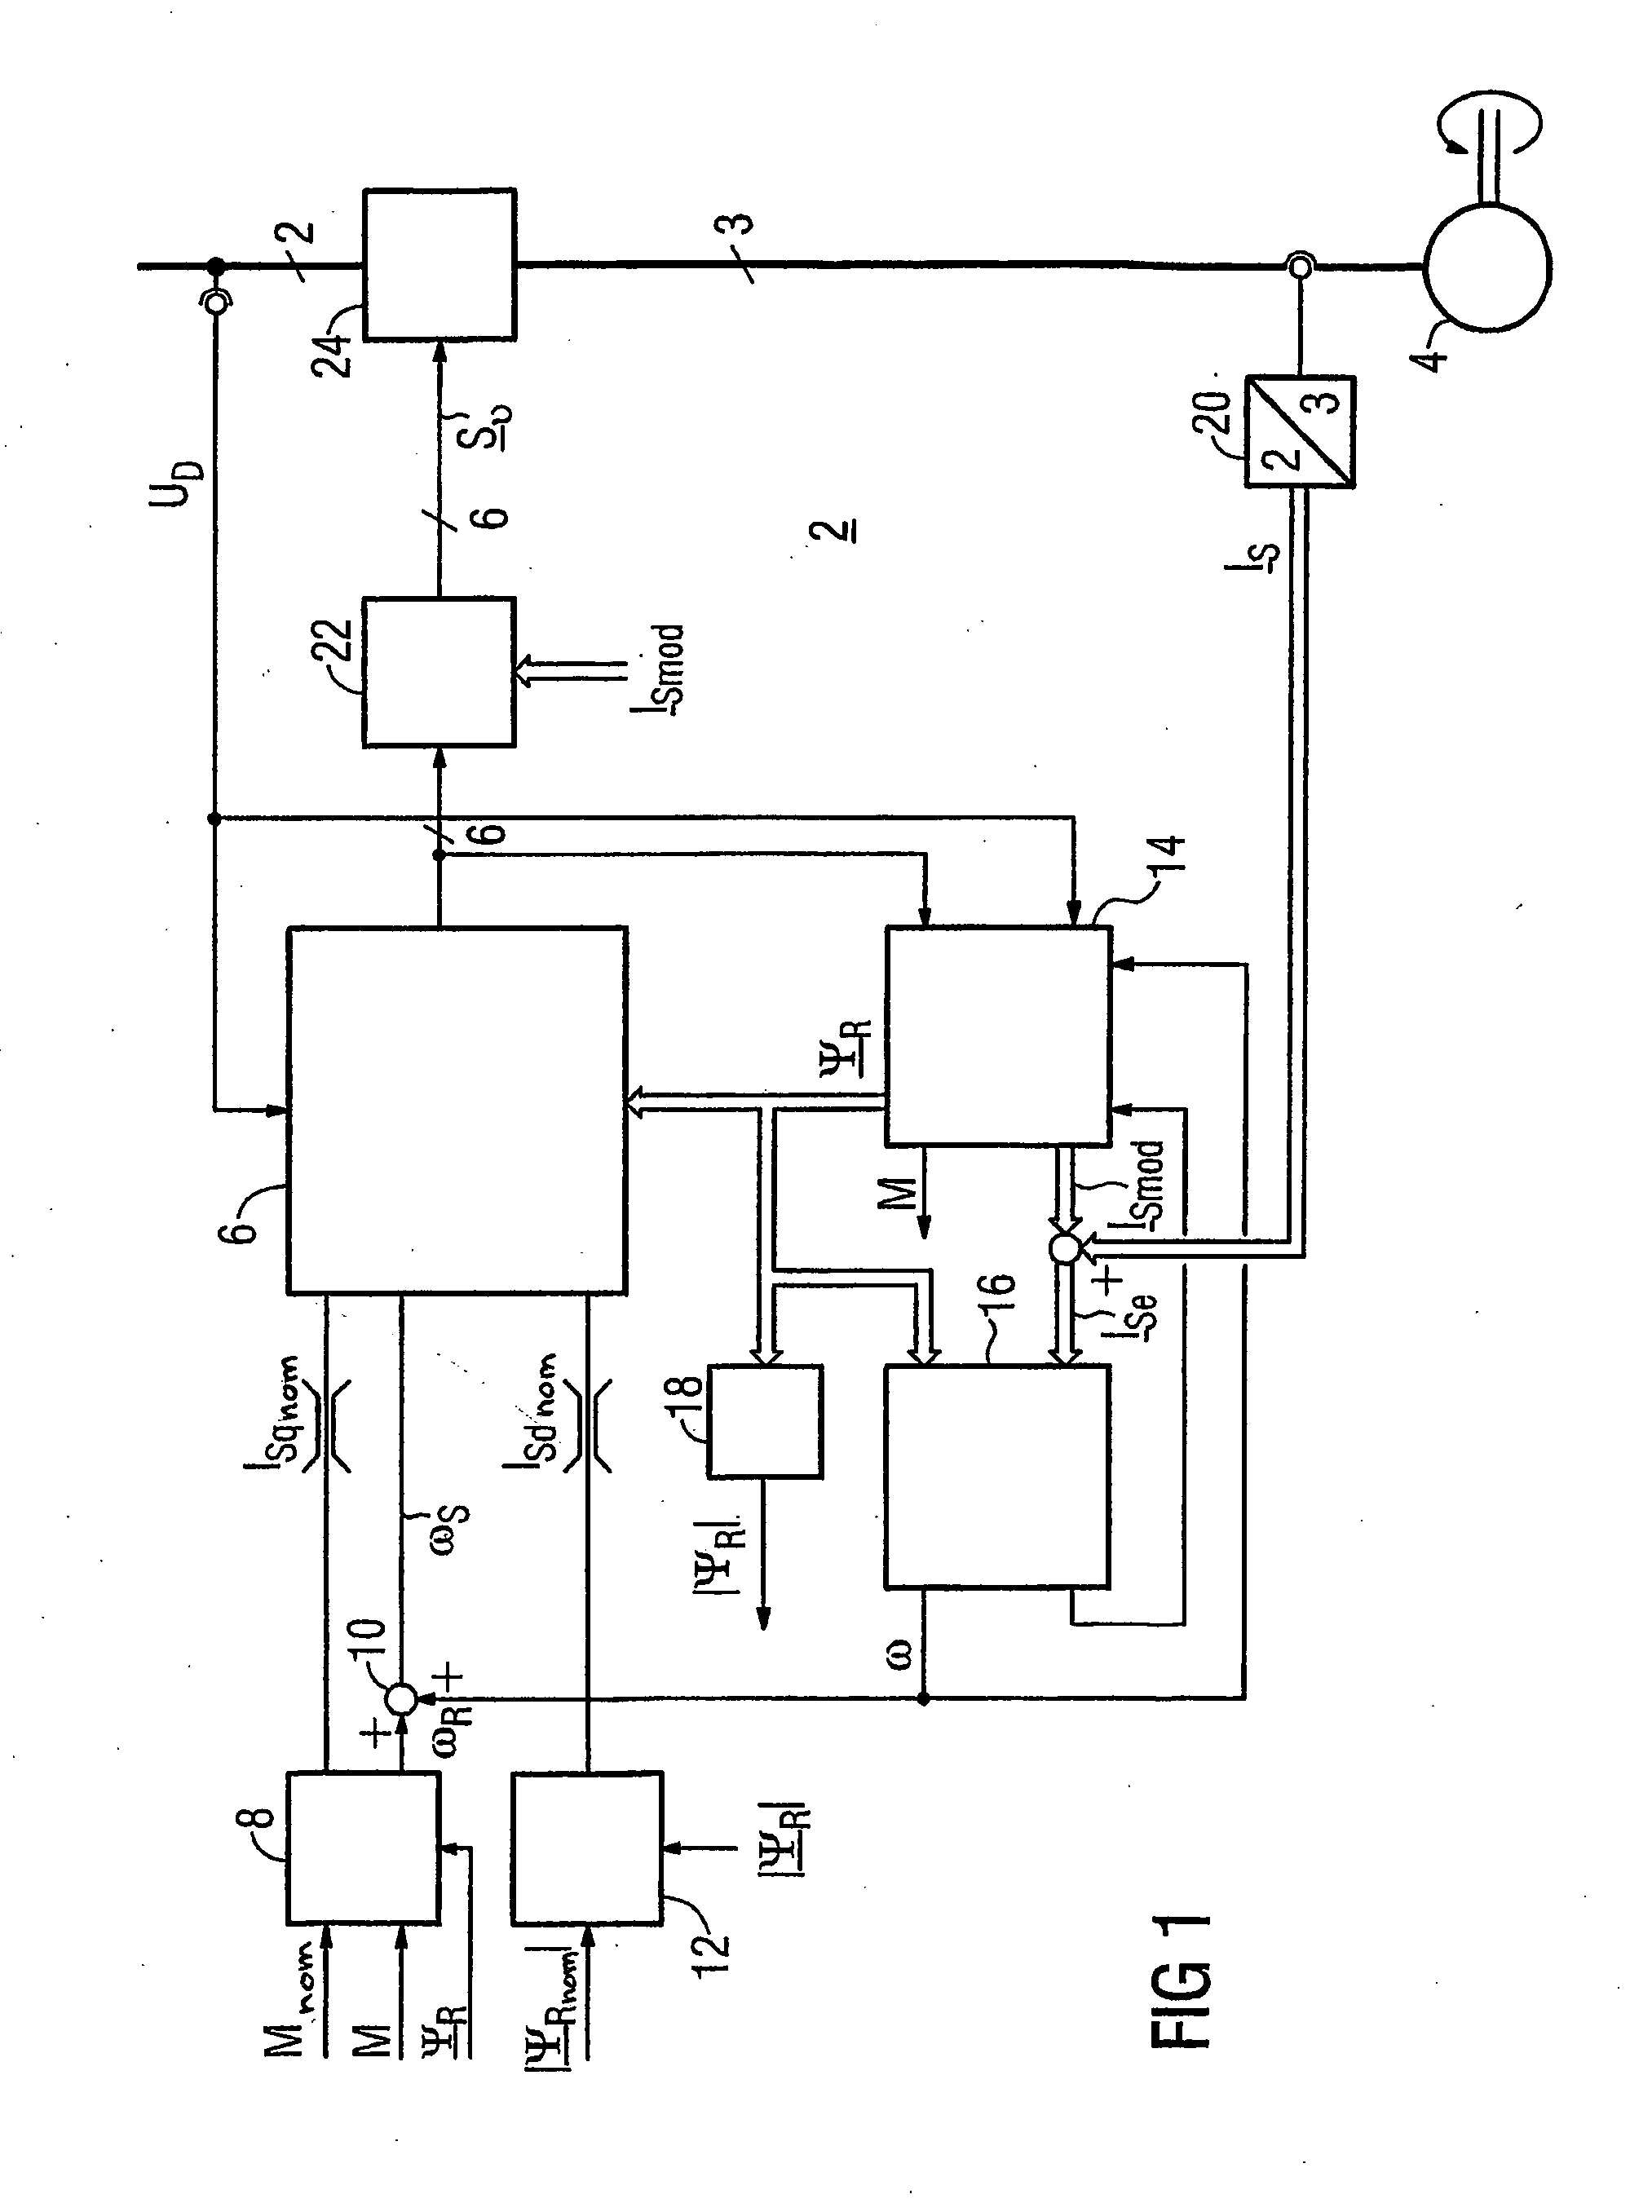 Method for Controlled Application of a Stator Current Set Point Value and of a Torque Set Point Value for a Converter-Fed Rotating-Field Machine